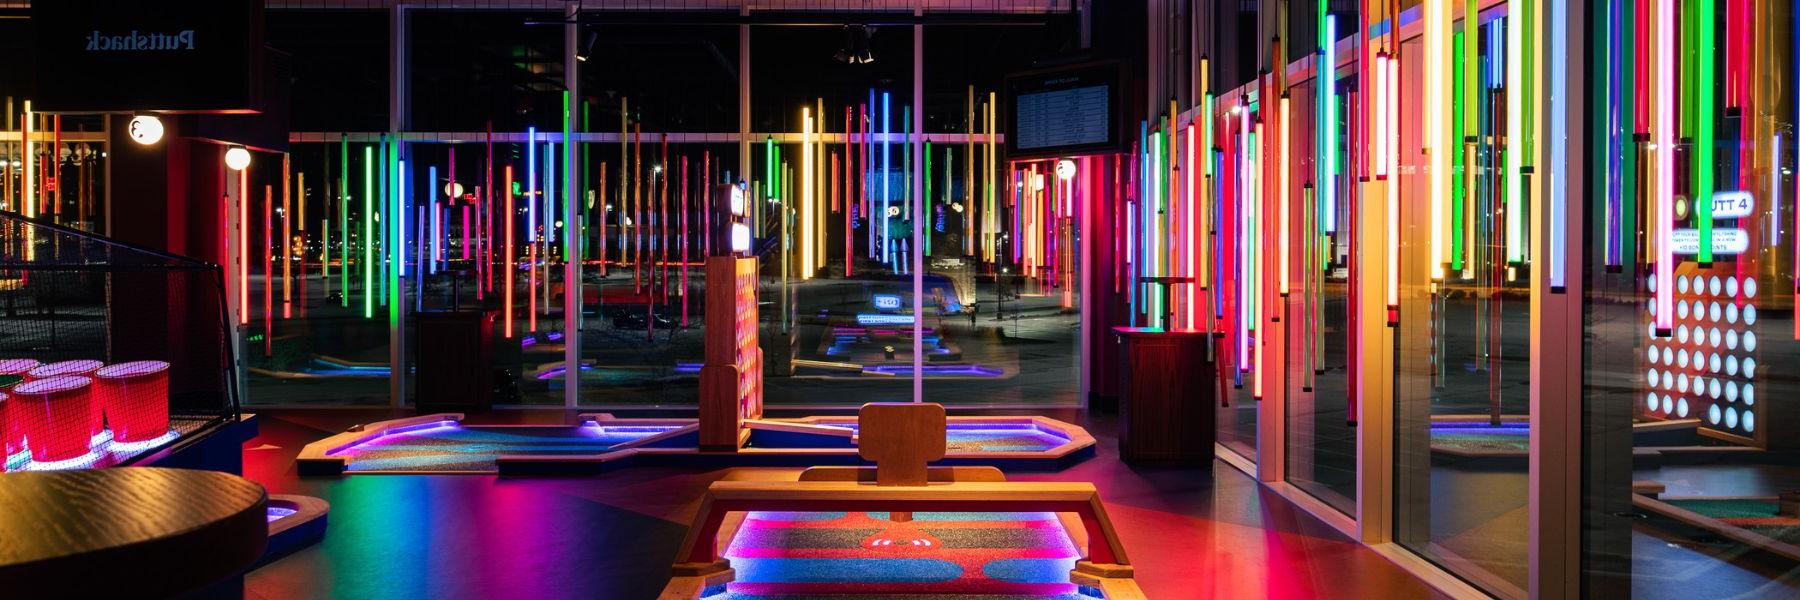 Puttshack offers Instagrammable, tech-infused miniature golf courses at City Foundry.